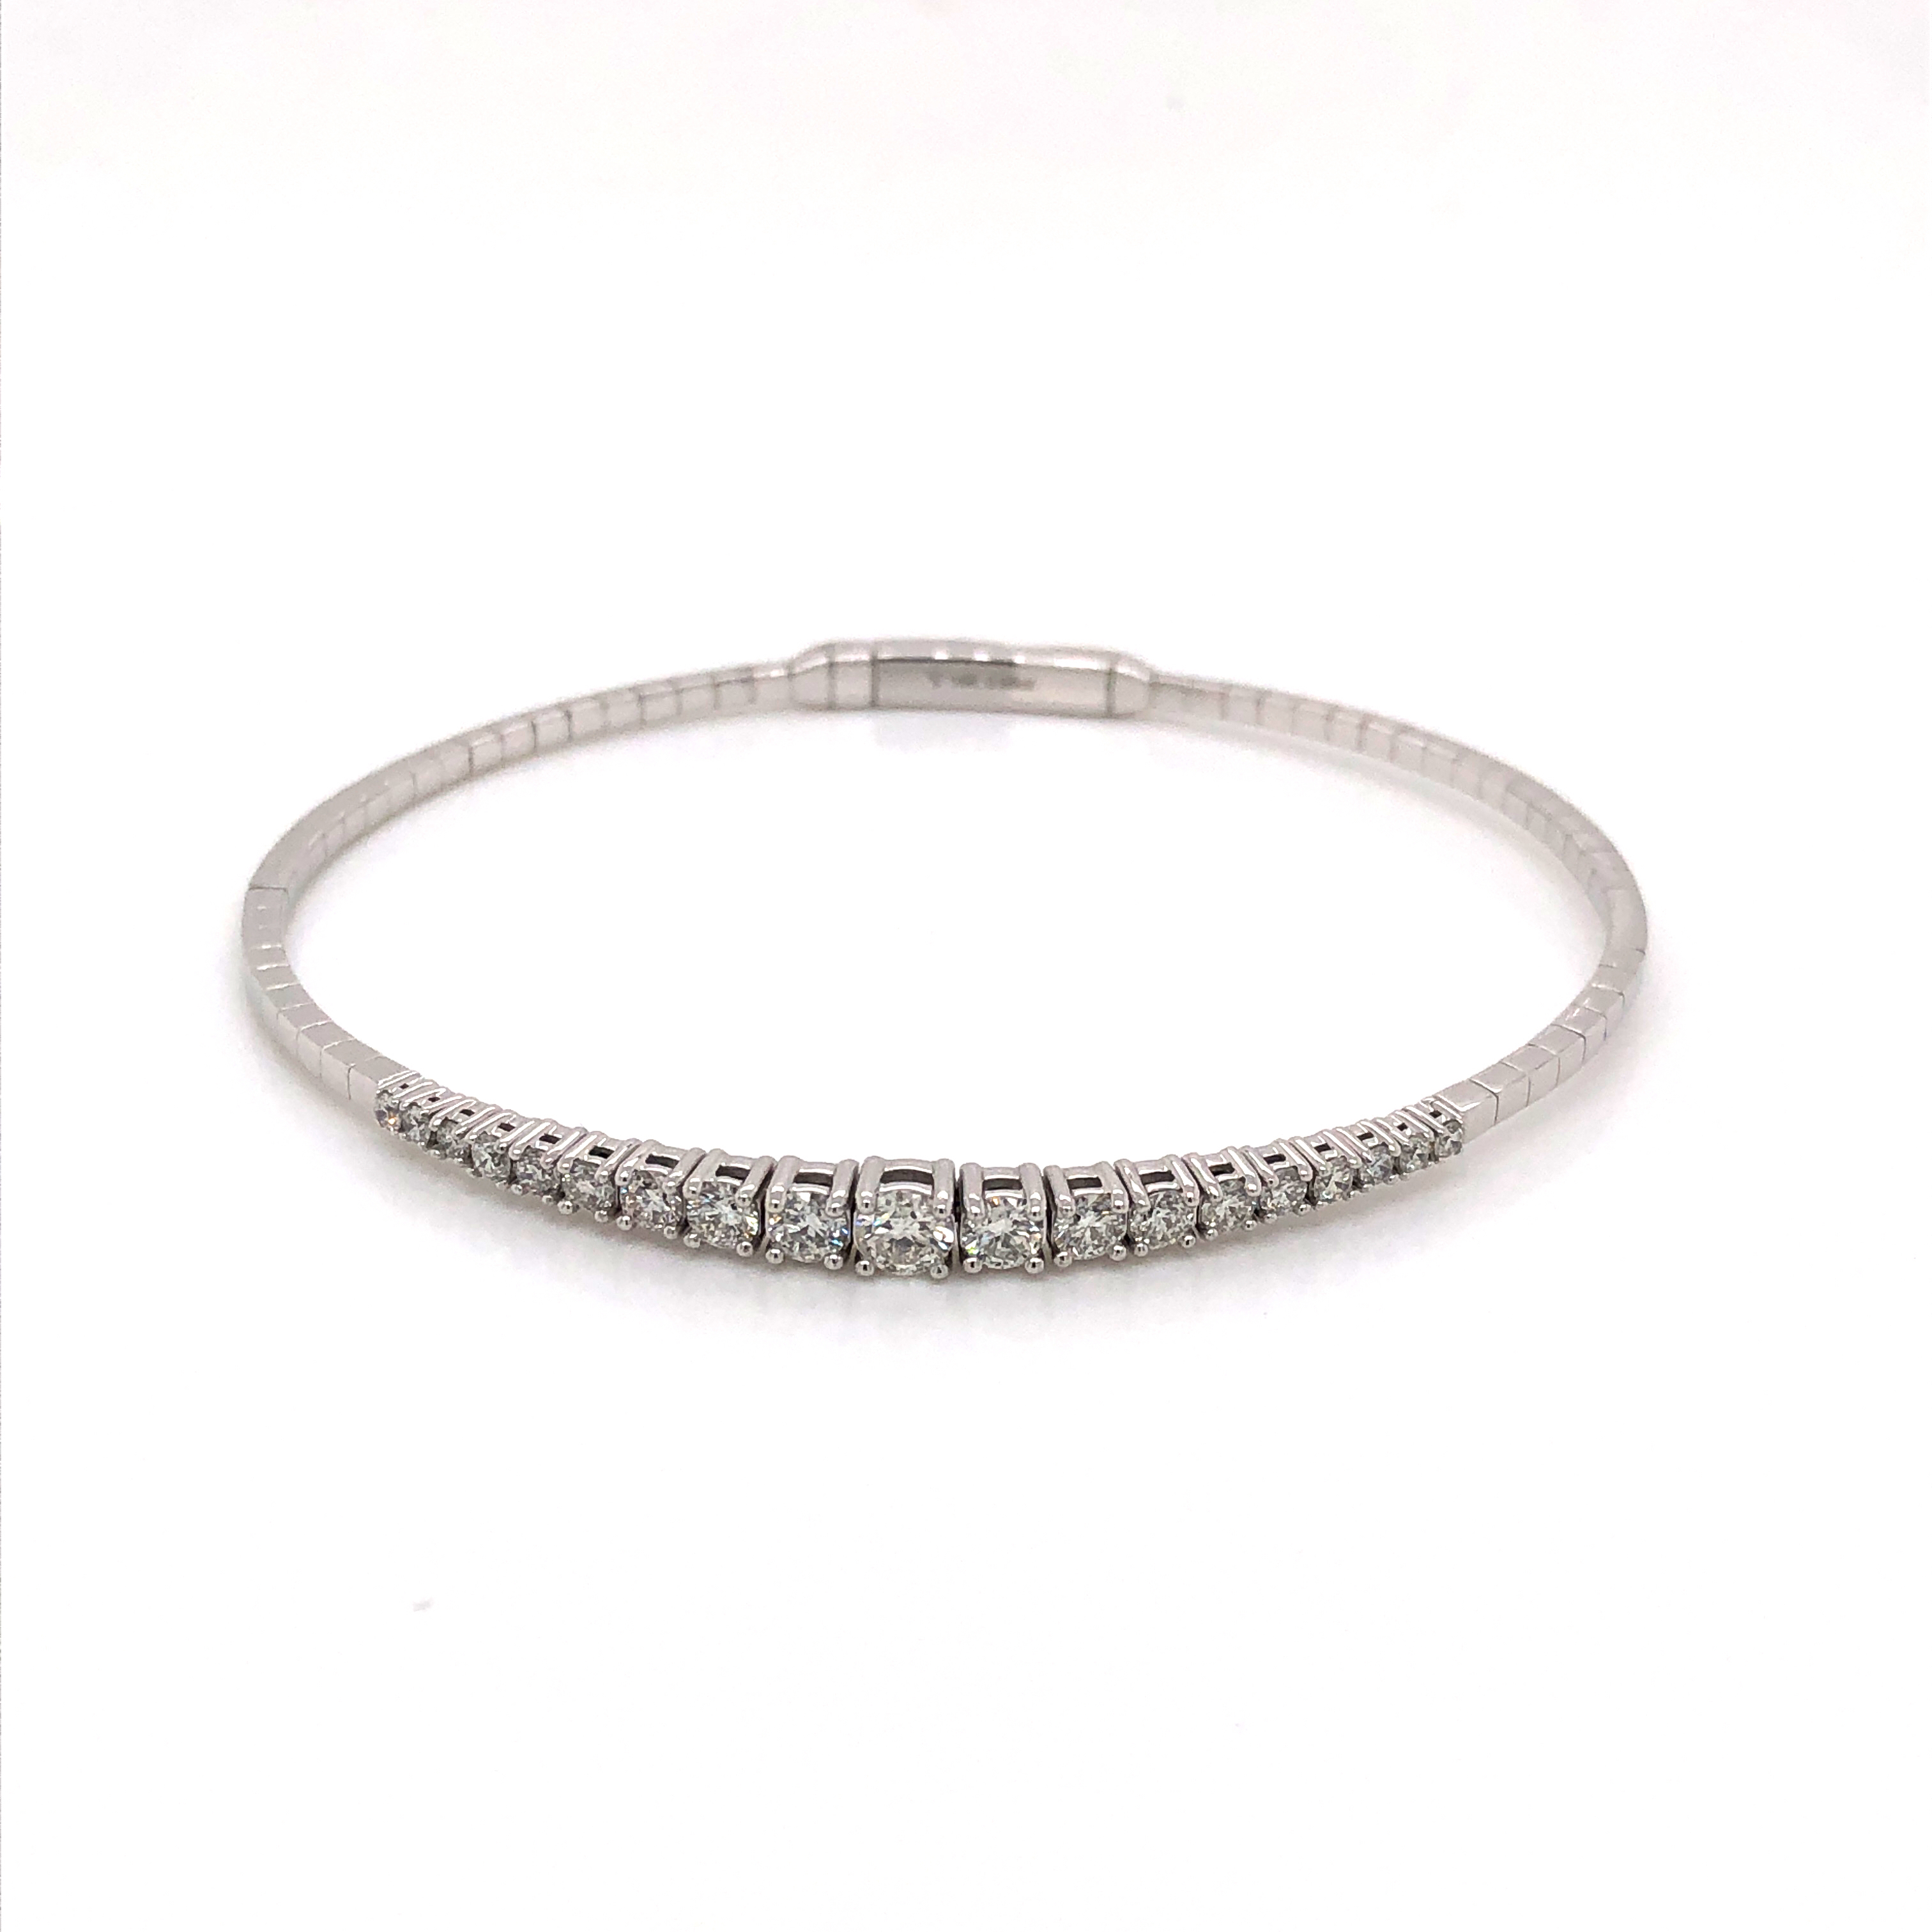 14 karat white gold flexible bangle bracelet with nineteen round brilliant diamonds graduating in size totaling 0.95 carat total weight G color  SI  clarity.